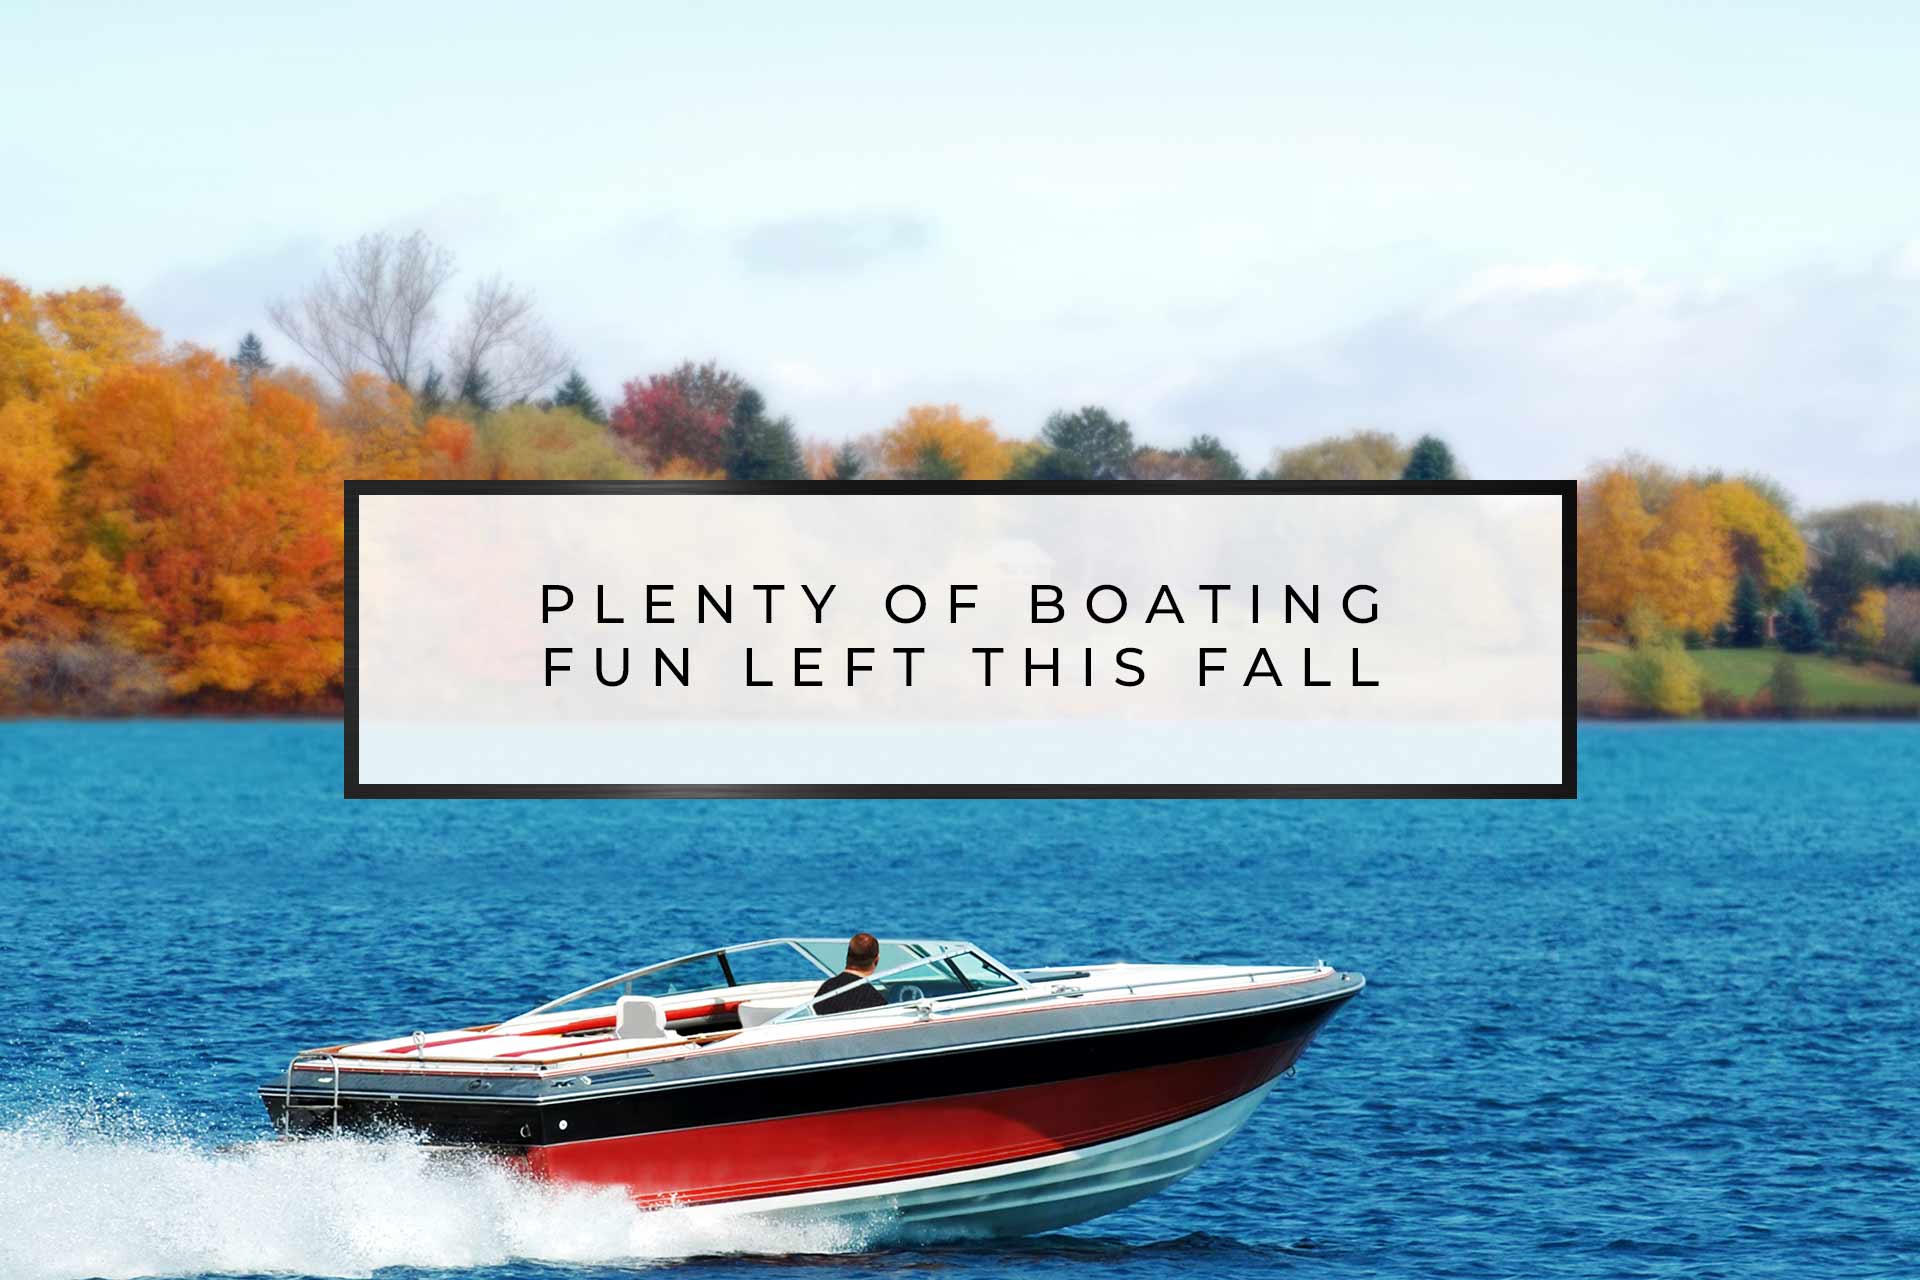 Plenty of Boating Fun Left this Fall | Sunset Marina is owned by the City of Rock Island and professionally managed by F3 Marina. Located in Sunset Park at 31st Avenue and the Mississippi River in Rock Island, Illinois, our beautiful harbor is surrounded by 250 acres of woods and a tranquil, secluded park with jogging paths, playgrounds, and picnic areas.